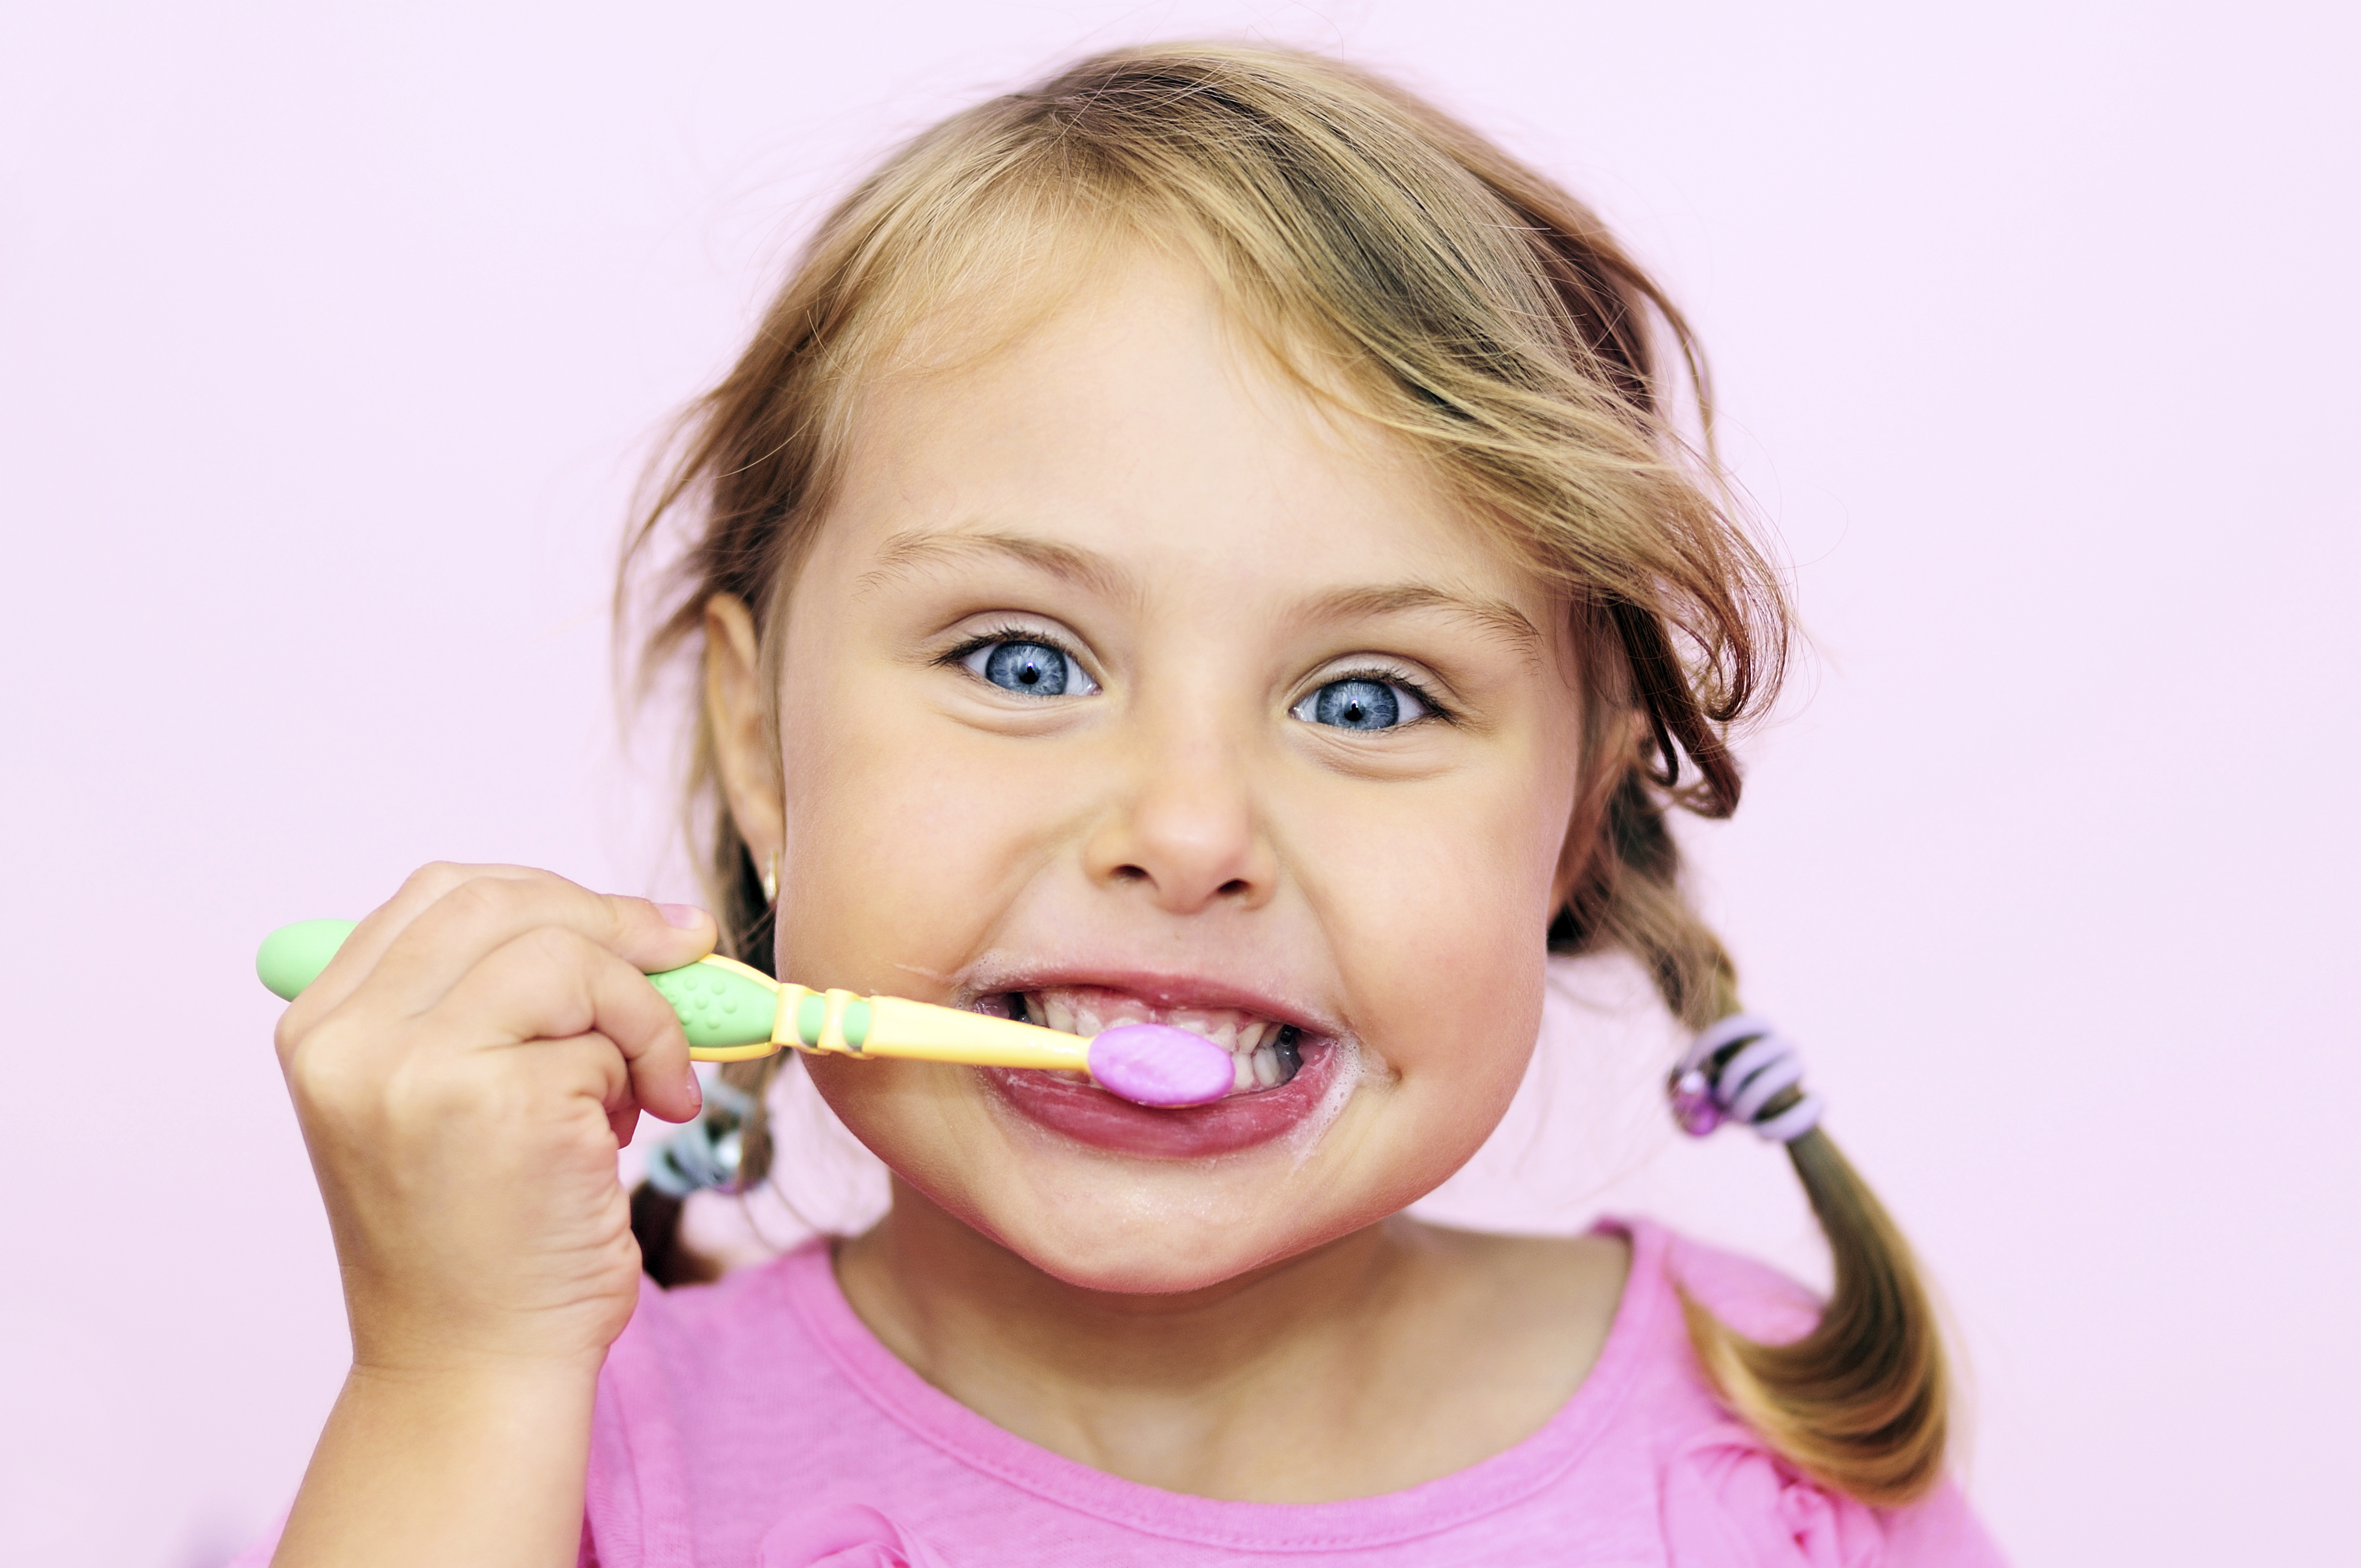 Government-funded health schemes assist with your child’s dental care